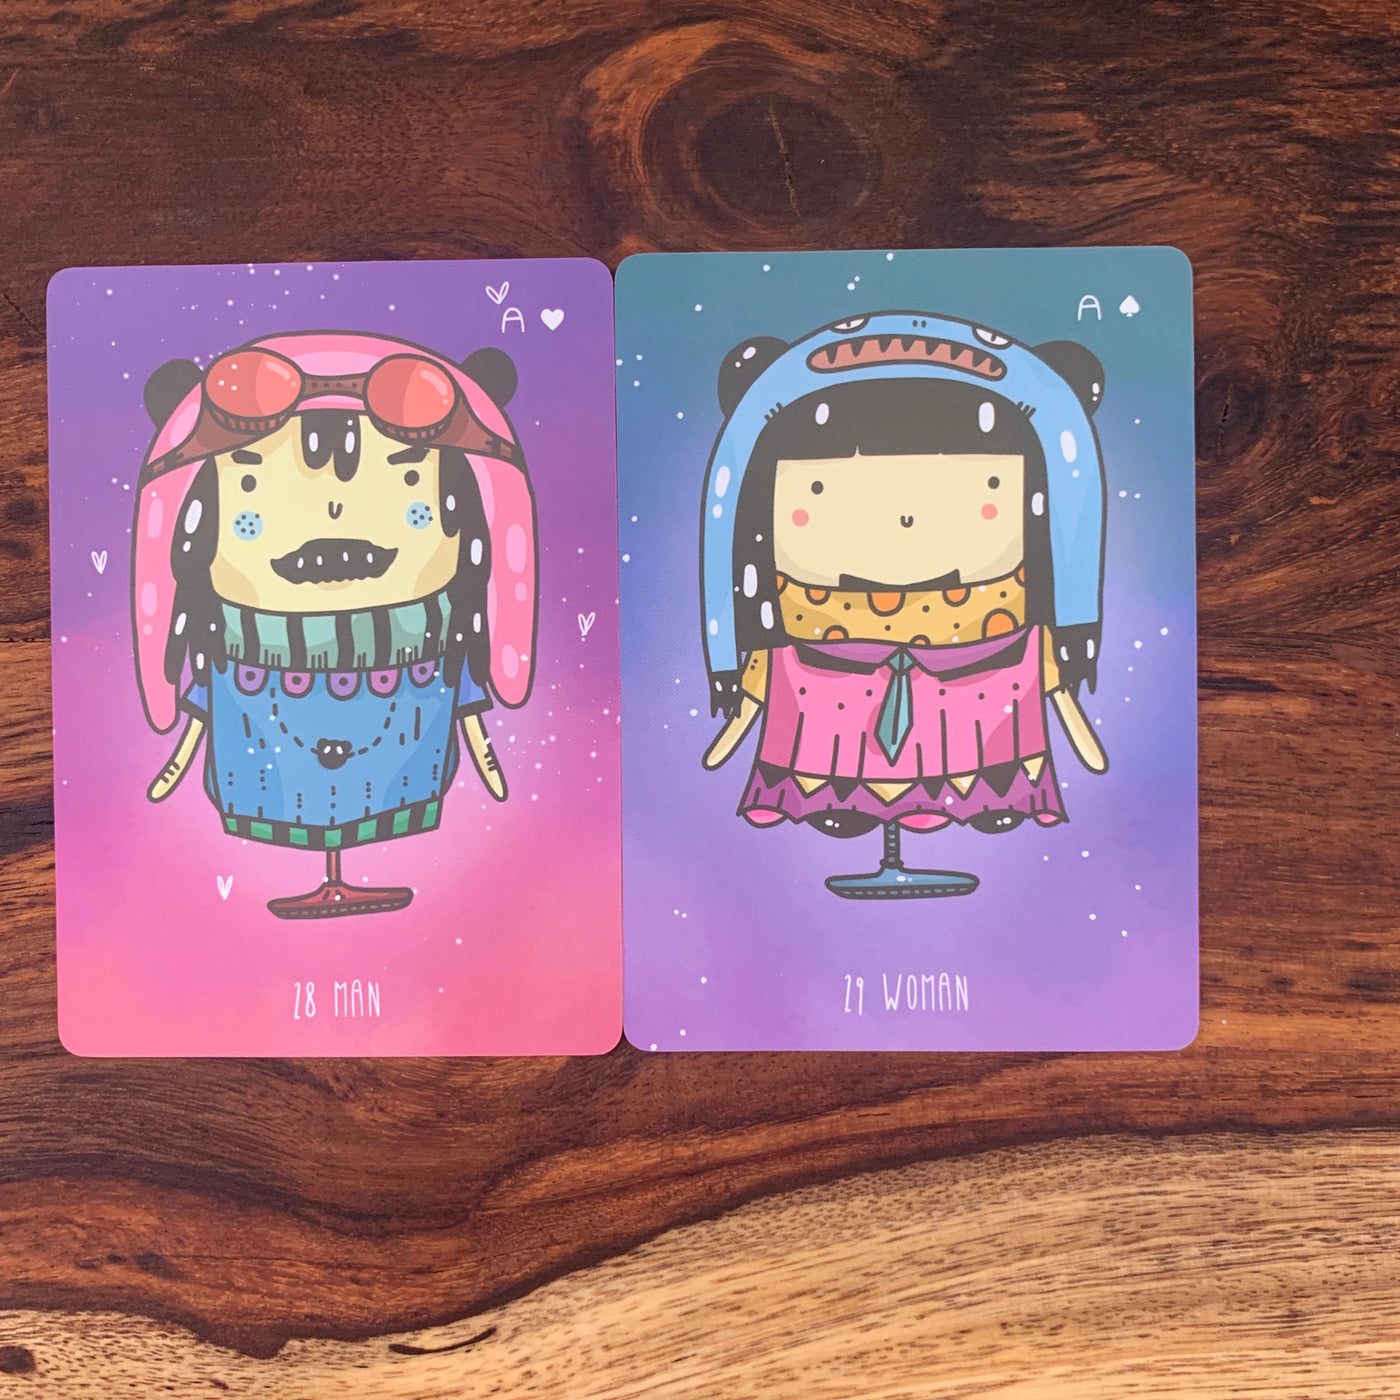 Man and Woman cards from the Sparkly Lenormand